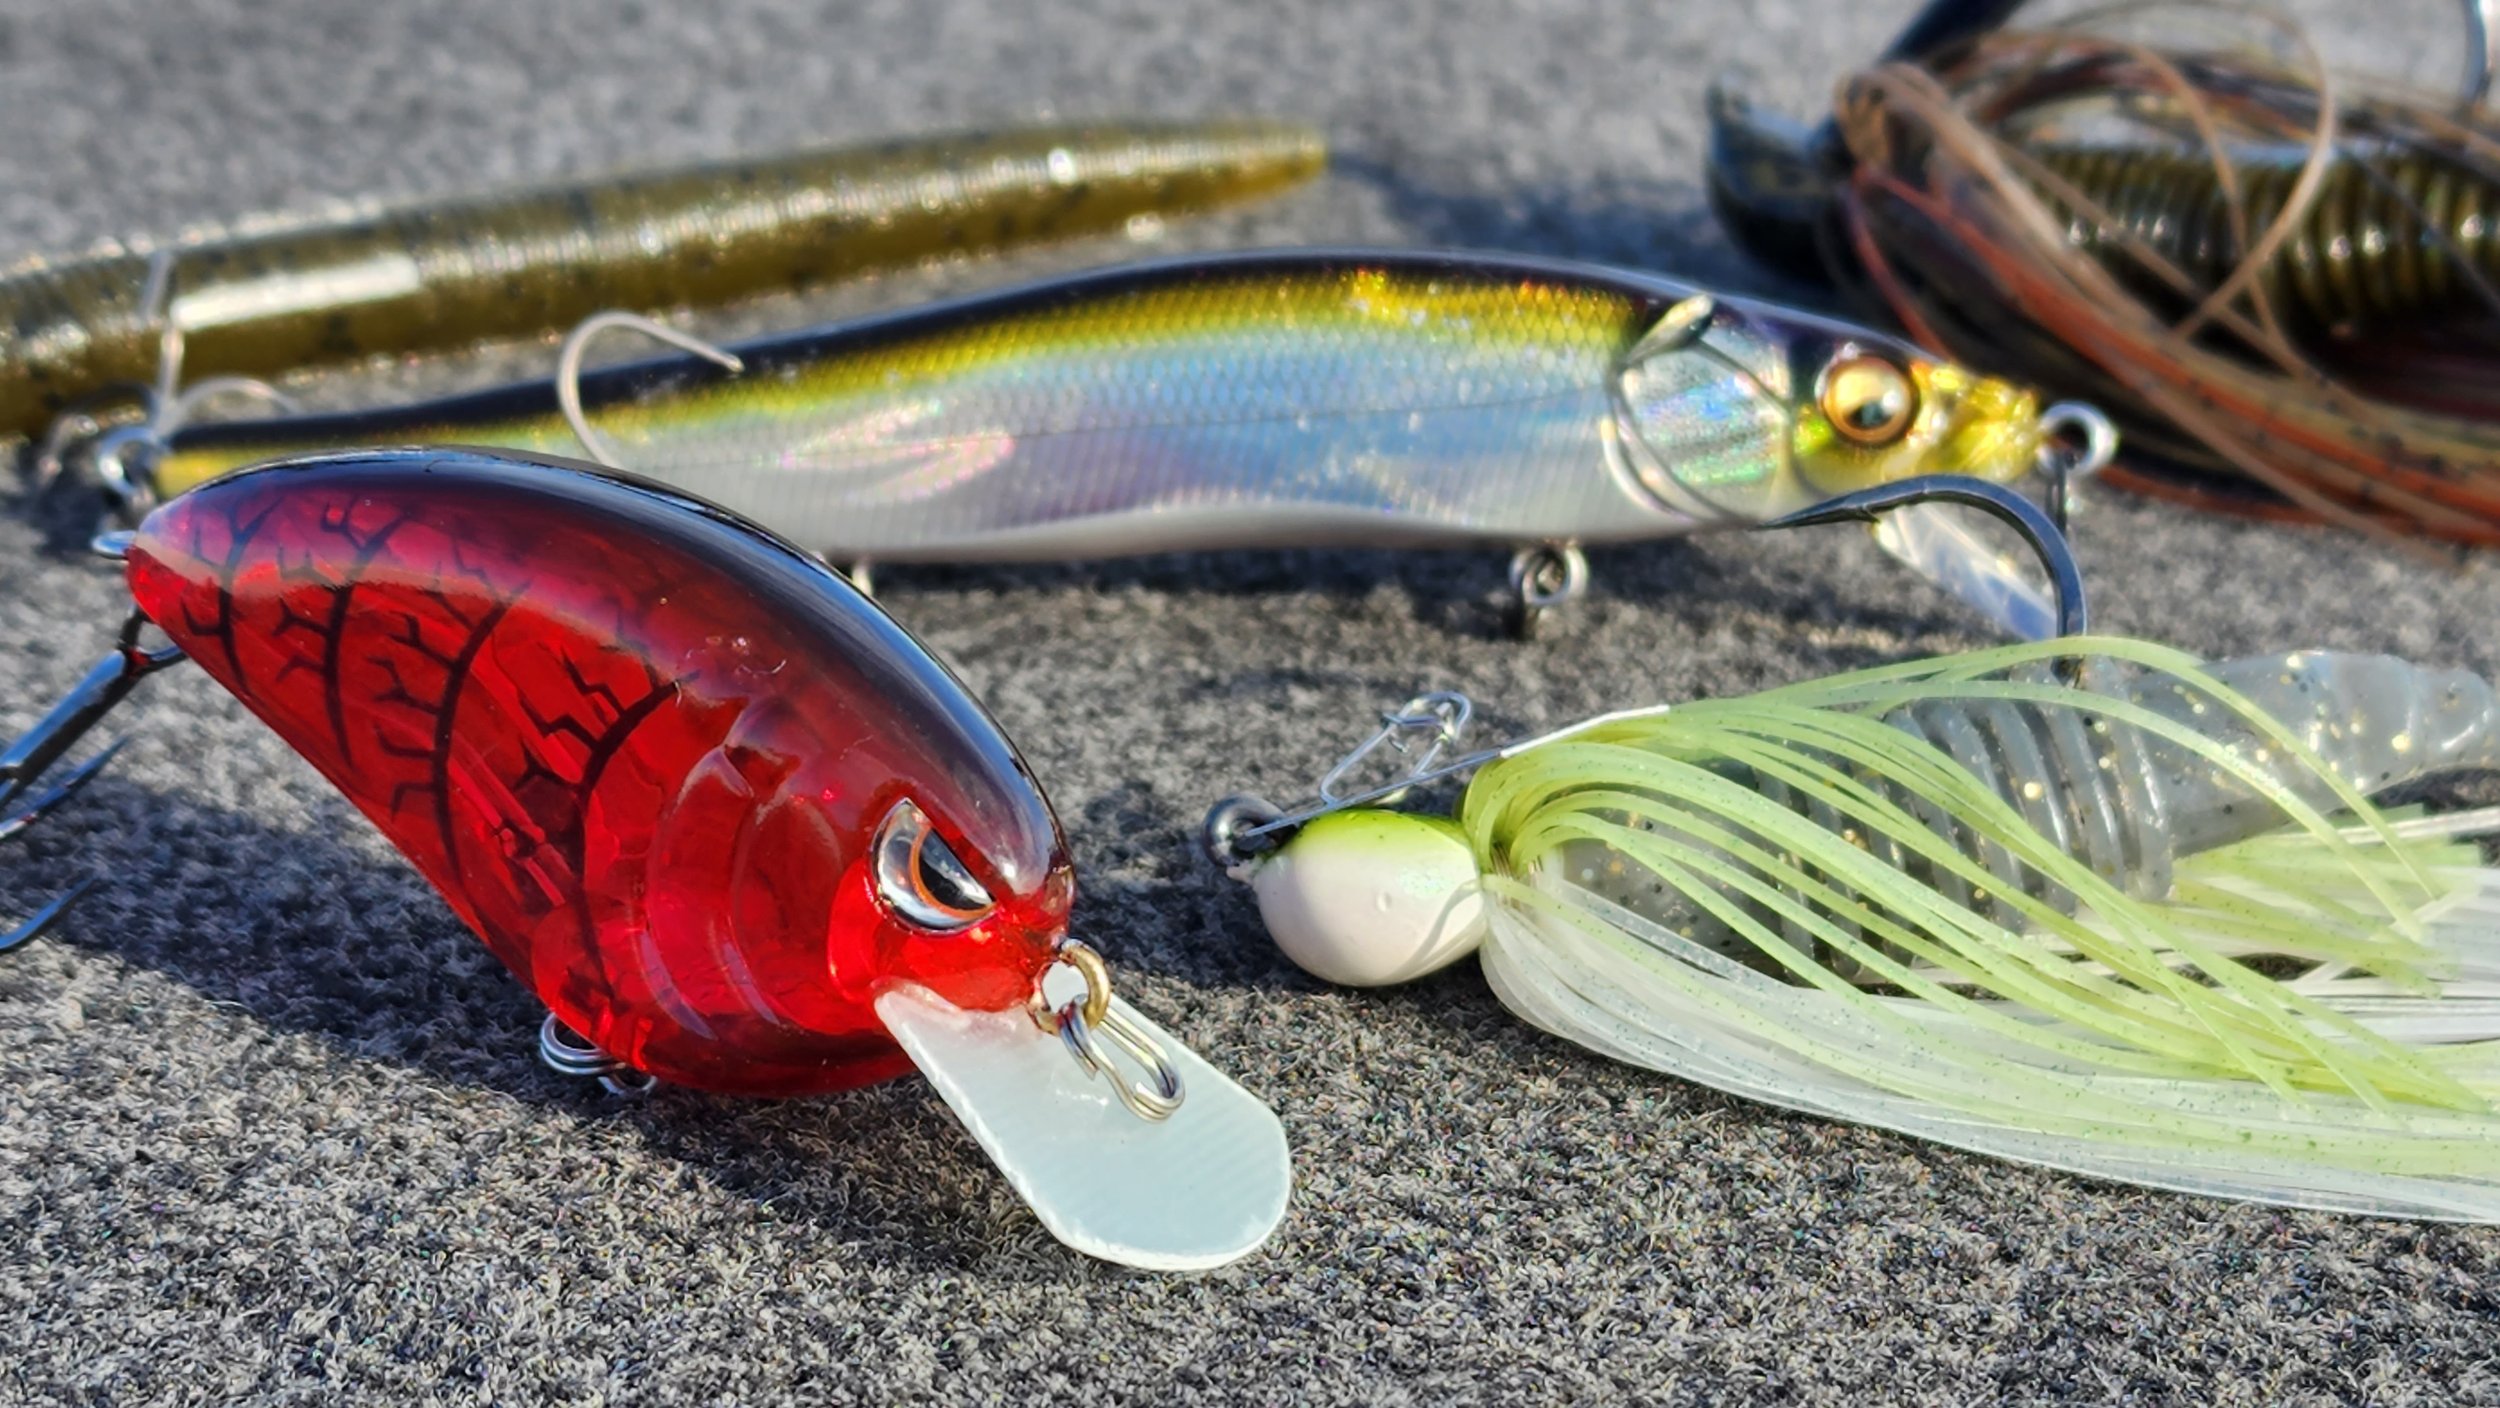 5 Must Have Baits For Spring Bass Fishing! — Tactical Bassin